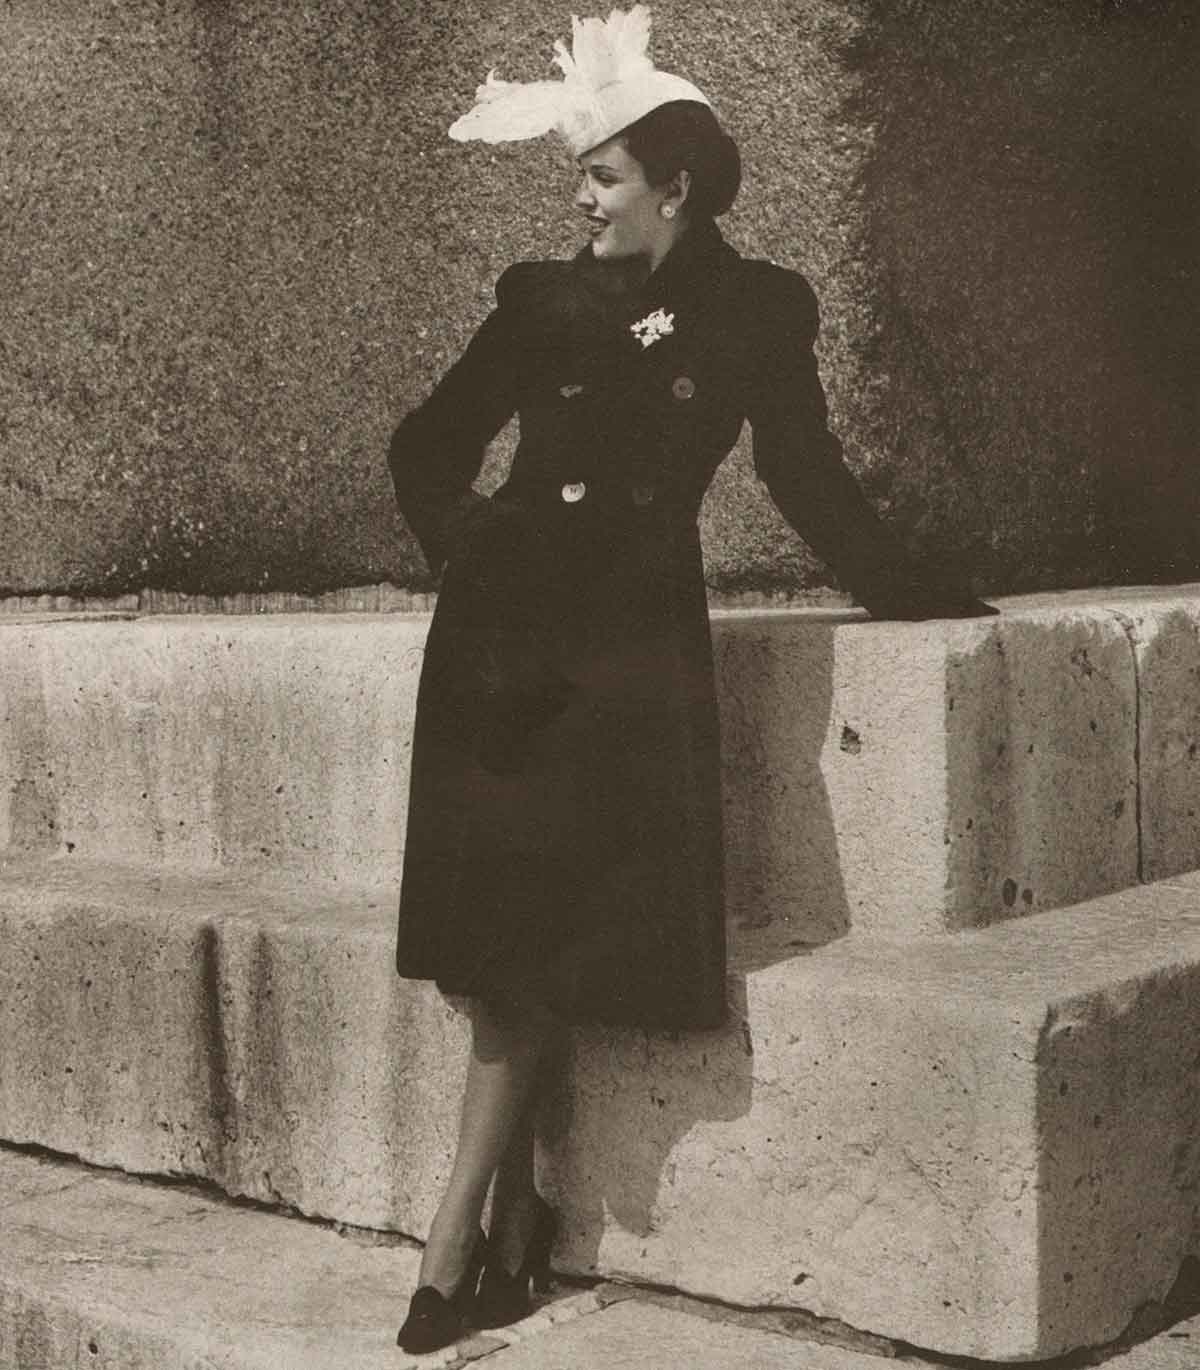 1940s-fashion---Winter-Coats-and-Dresses---Vogue-1940